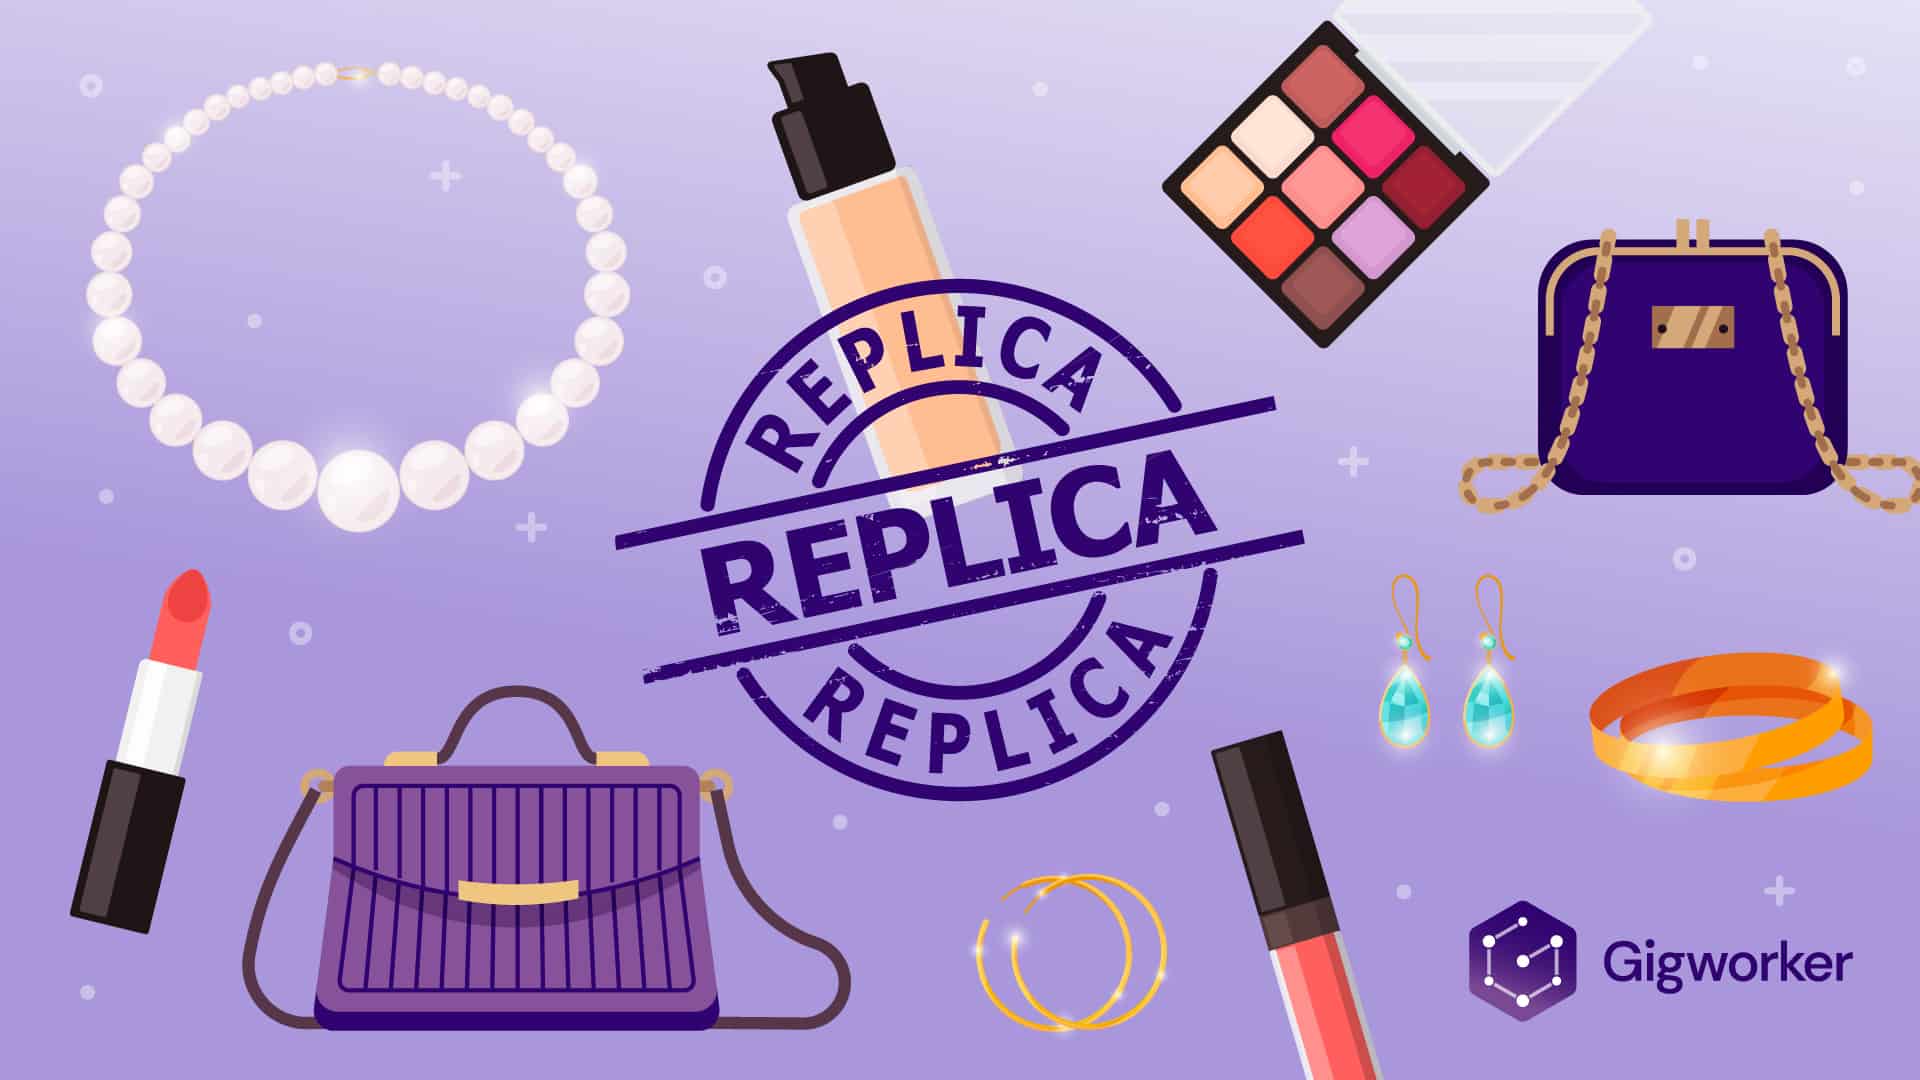 vector graphic showing an illustration of how to sell replicas legally